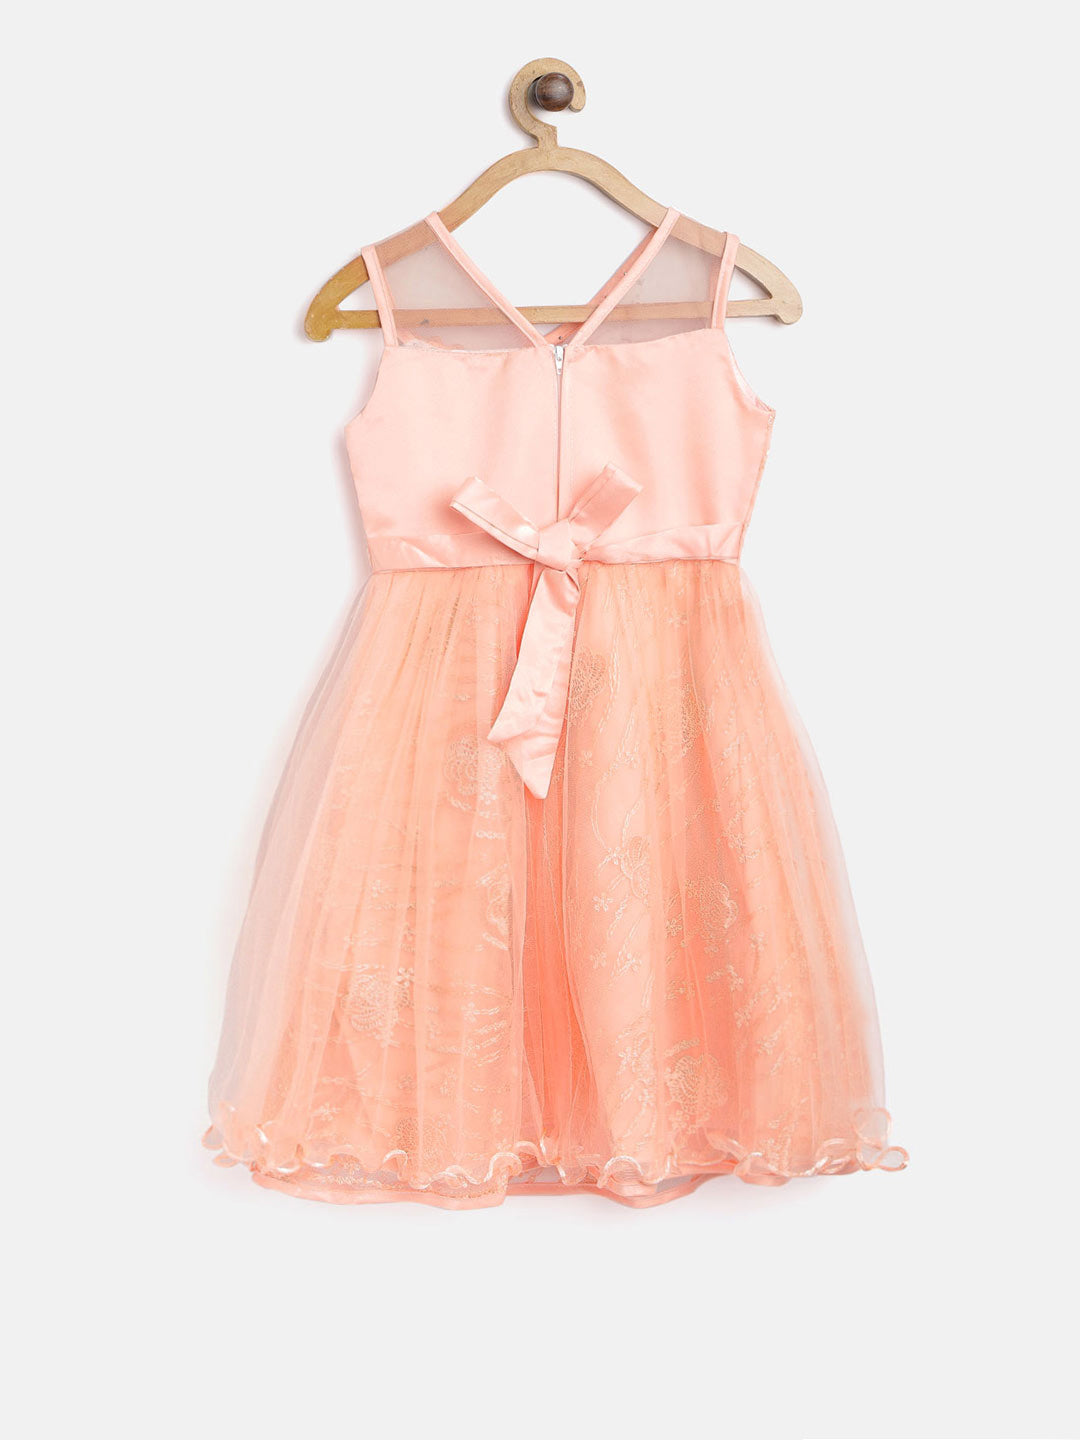 Girls Orange Flowers and Pearls embellished Party Dress